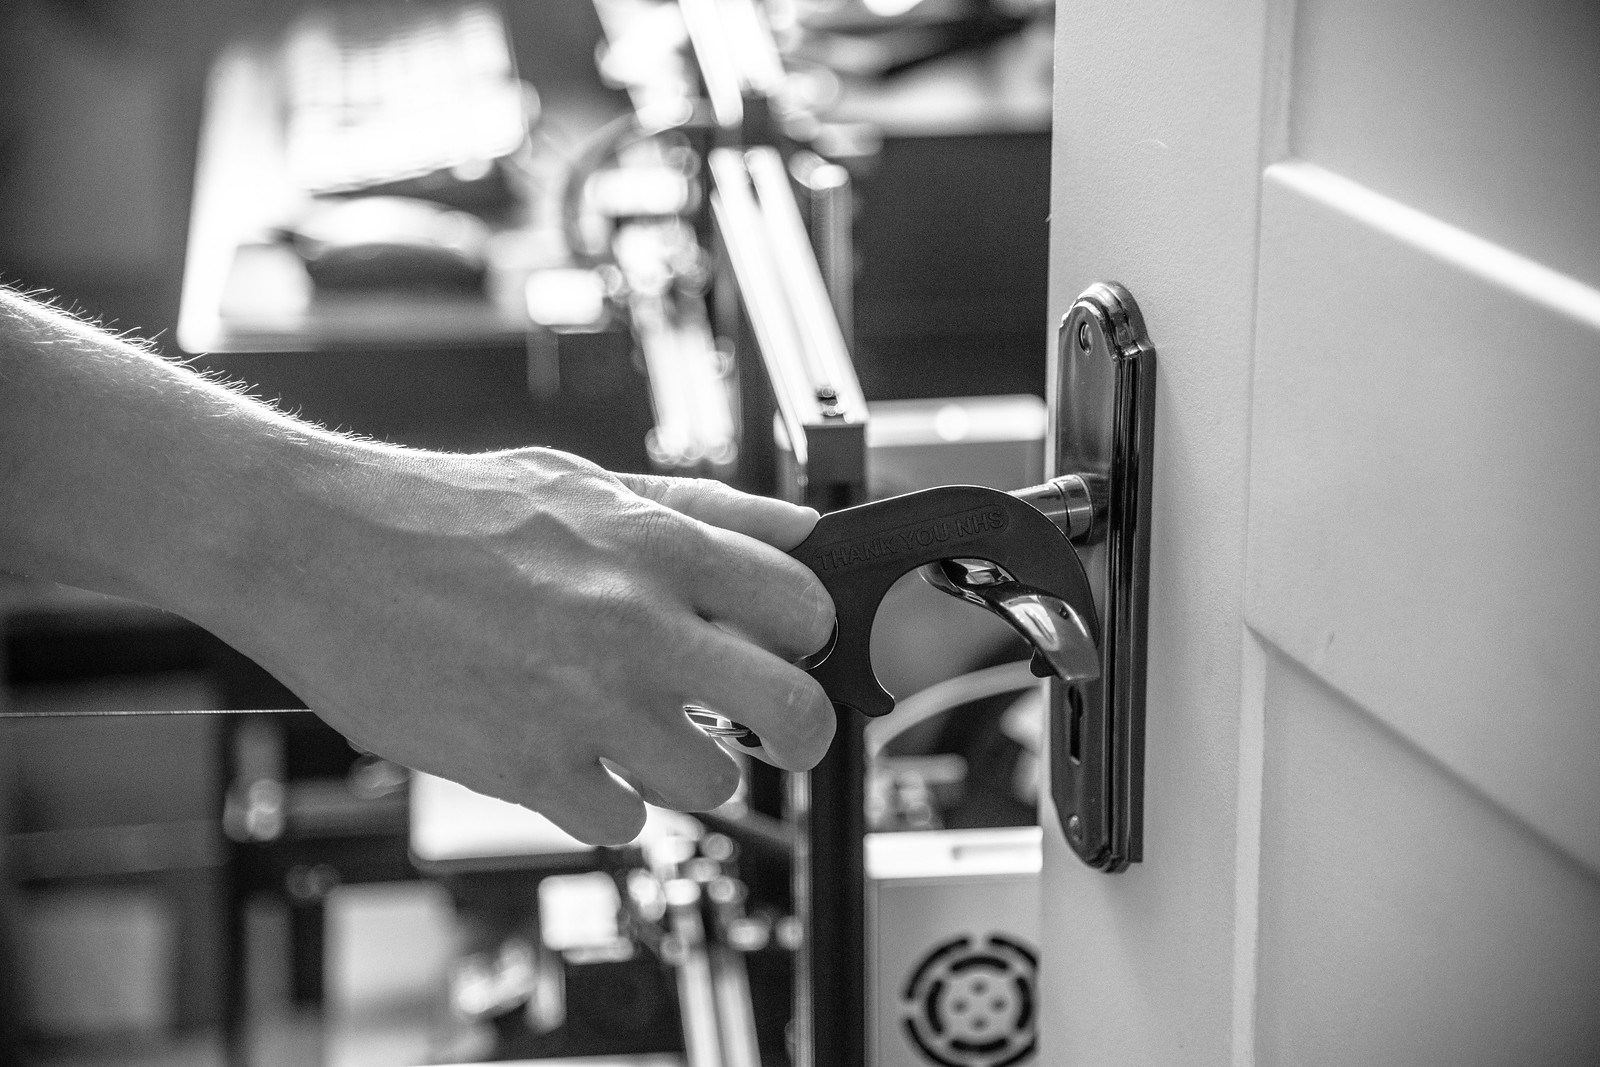 Black and white photo of hand and device opening door handle - copyright thisisjude_uk 2020